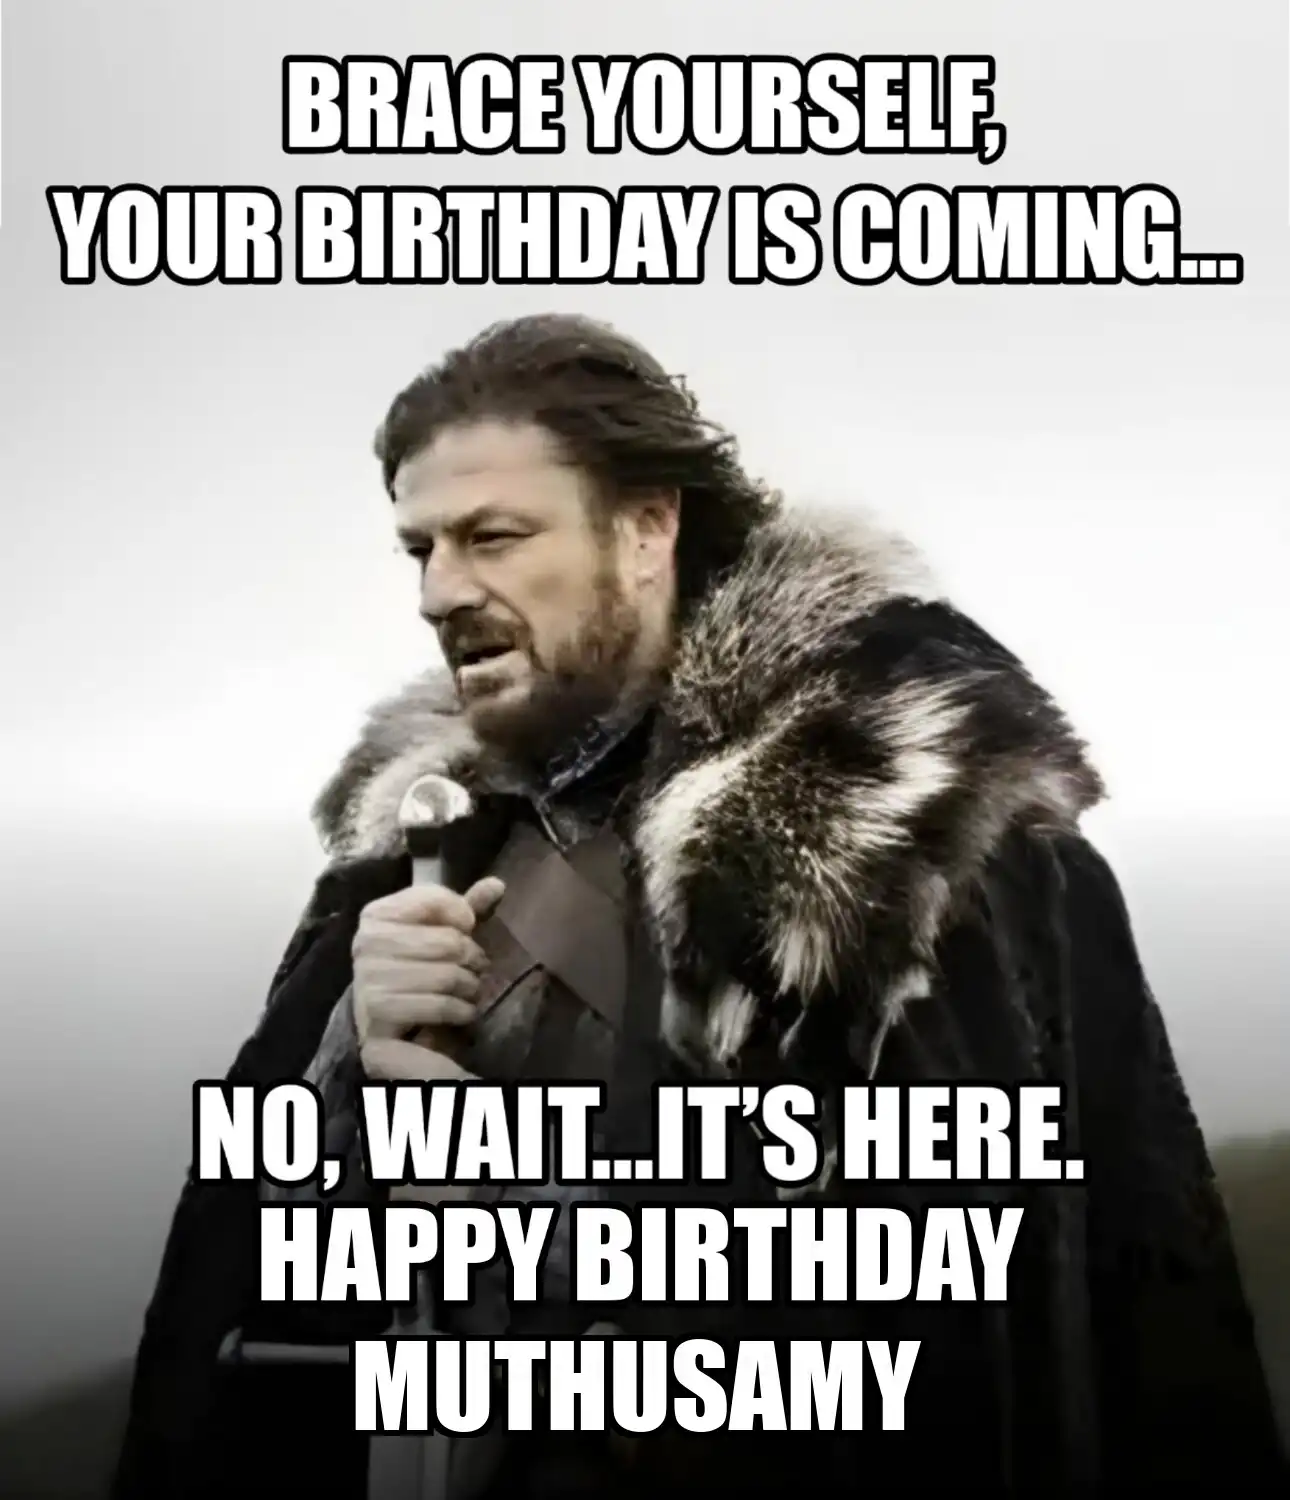 Happy Birthday Muthusamy Brace Yourself Your Birthday Is Coming Meme